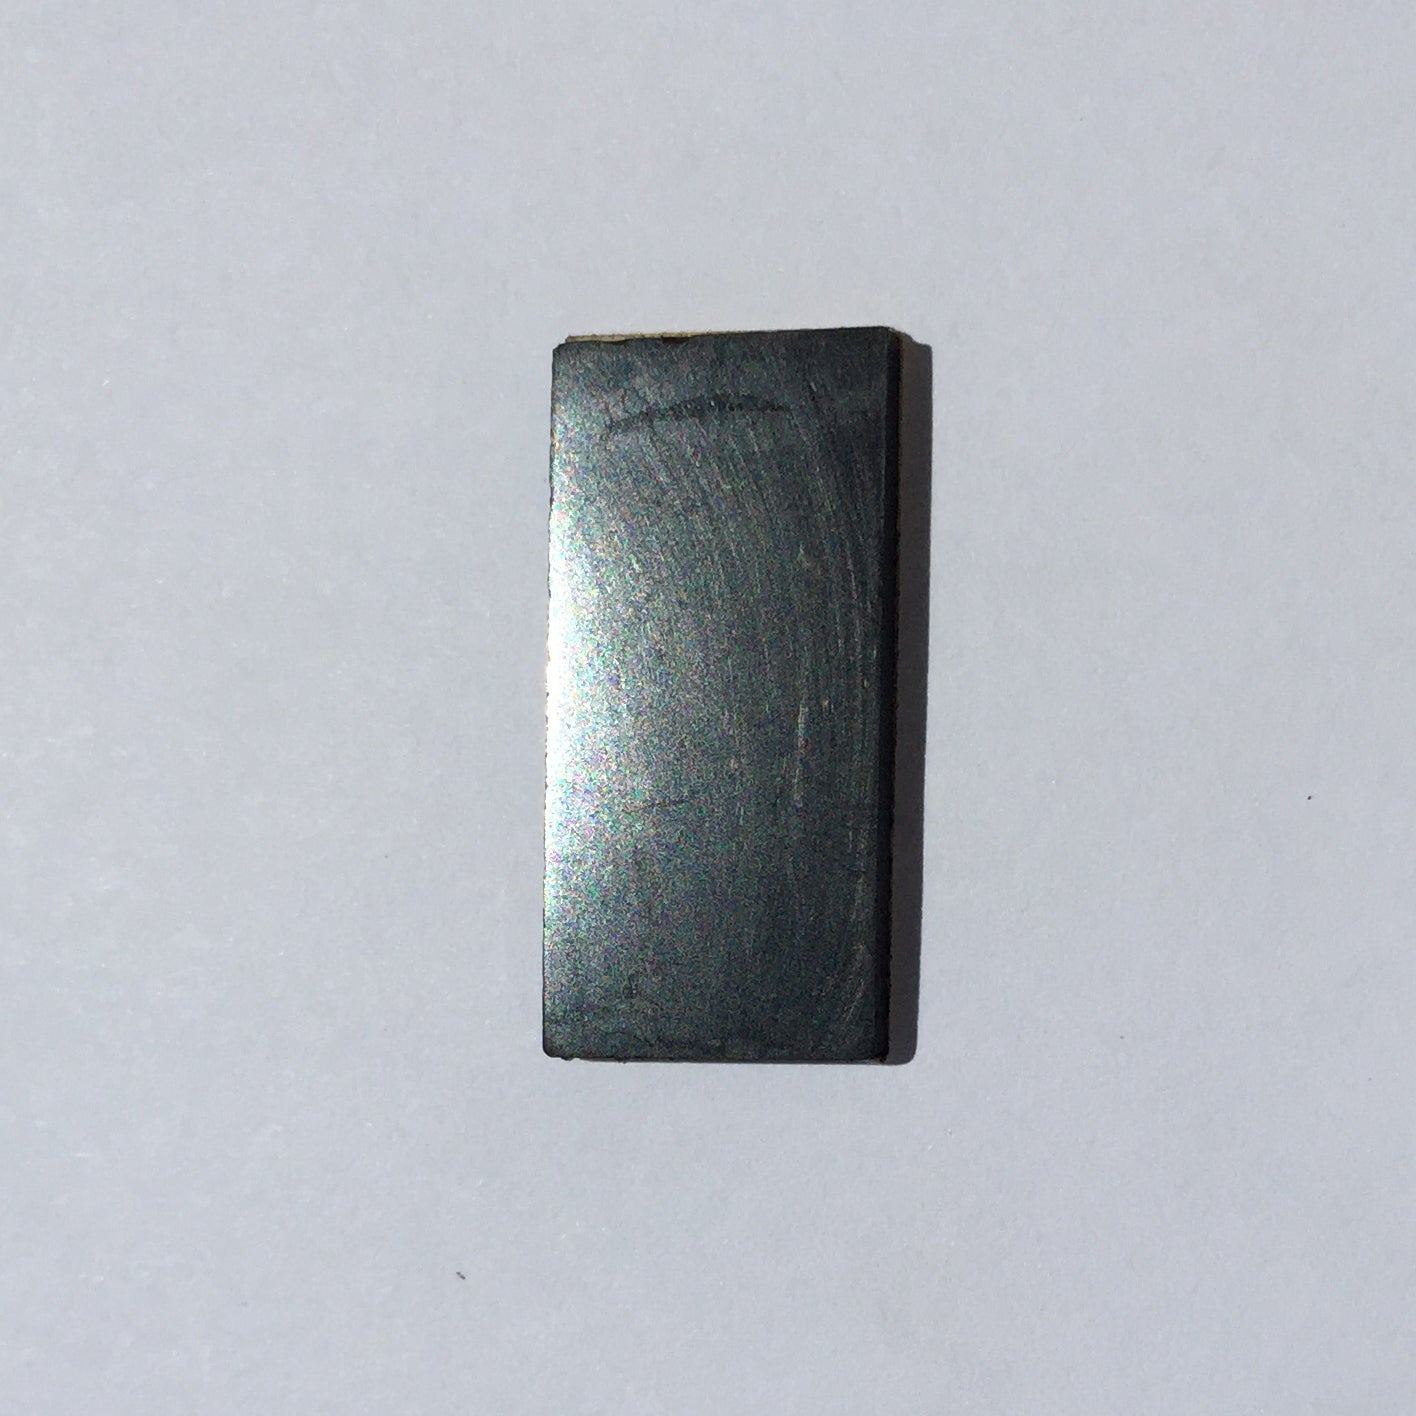 Polished Protection Plate 15mm x 30mm (Sold in Sets of 2)